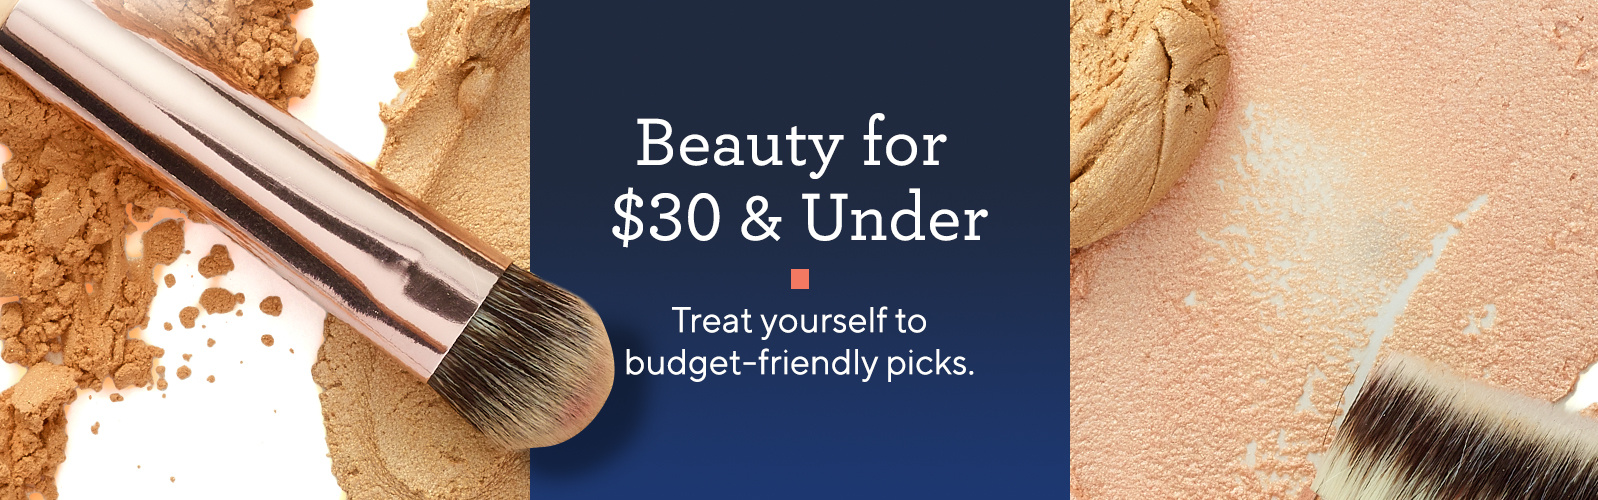 Beauty for $30 & Under  Treat yourself to budget-friendly picks.